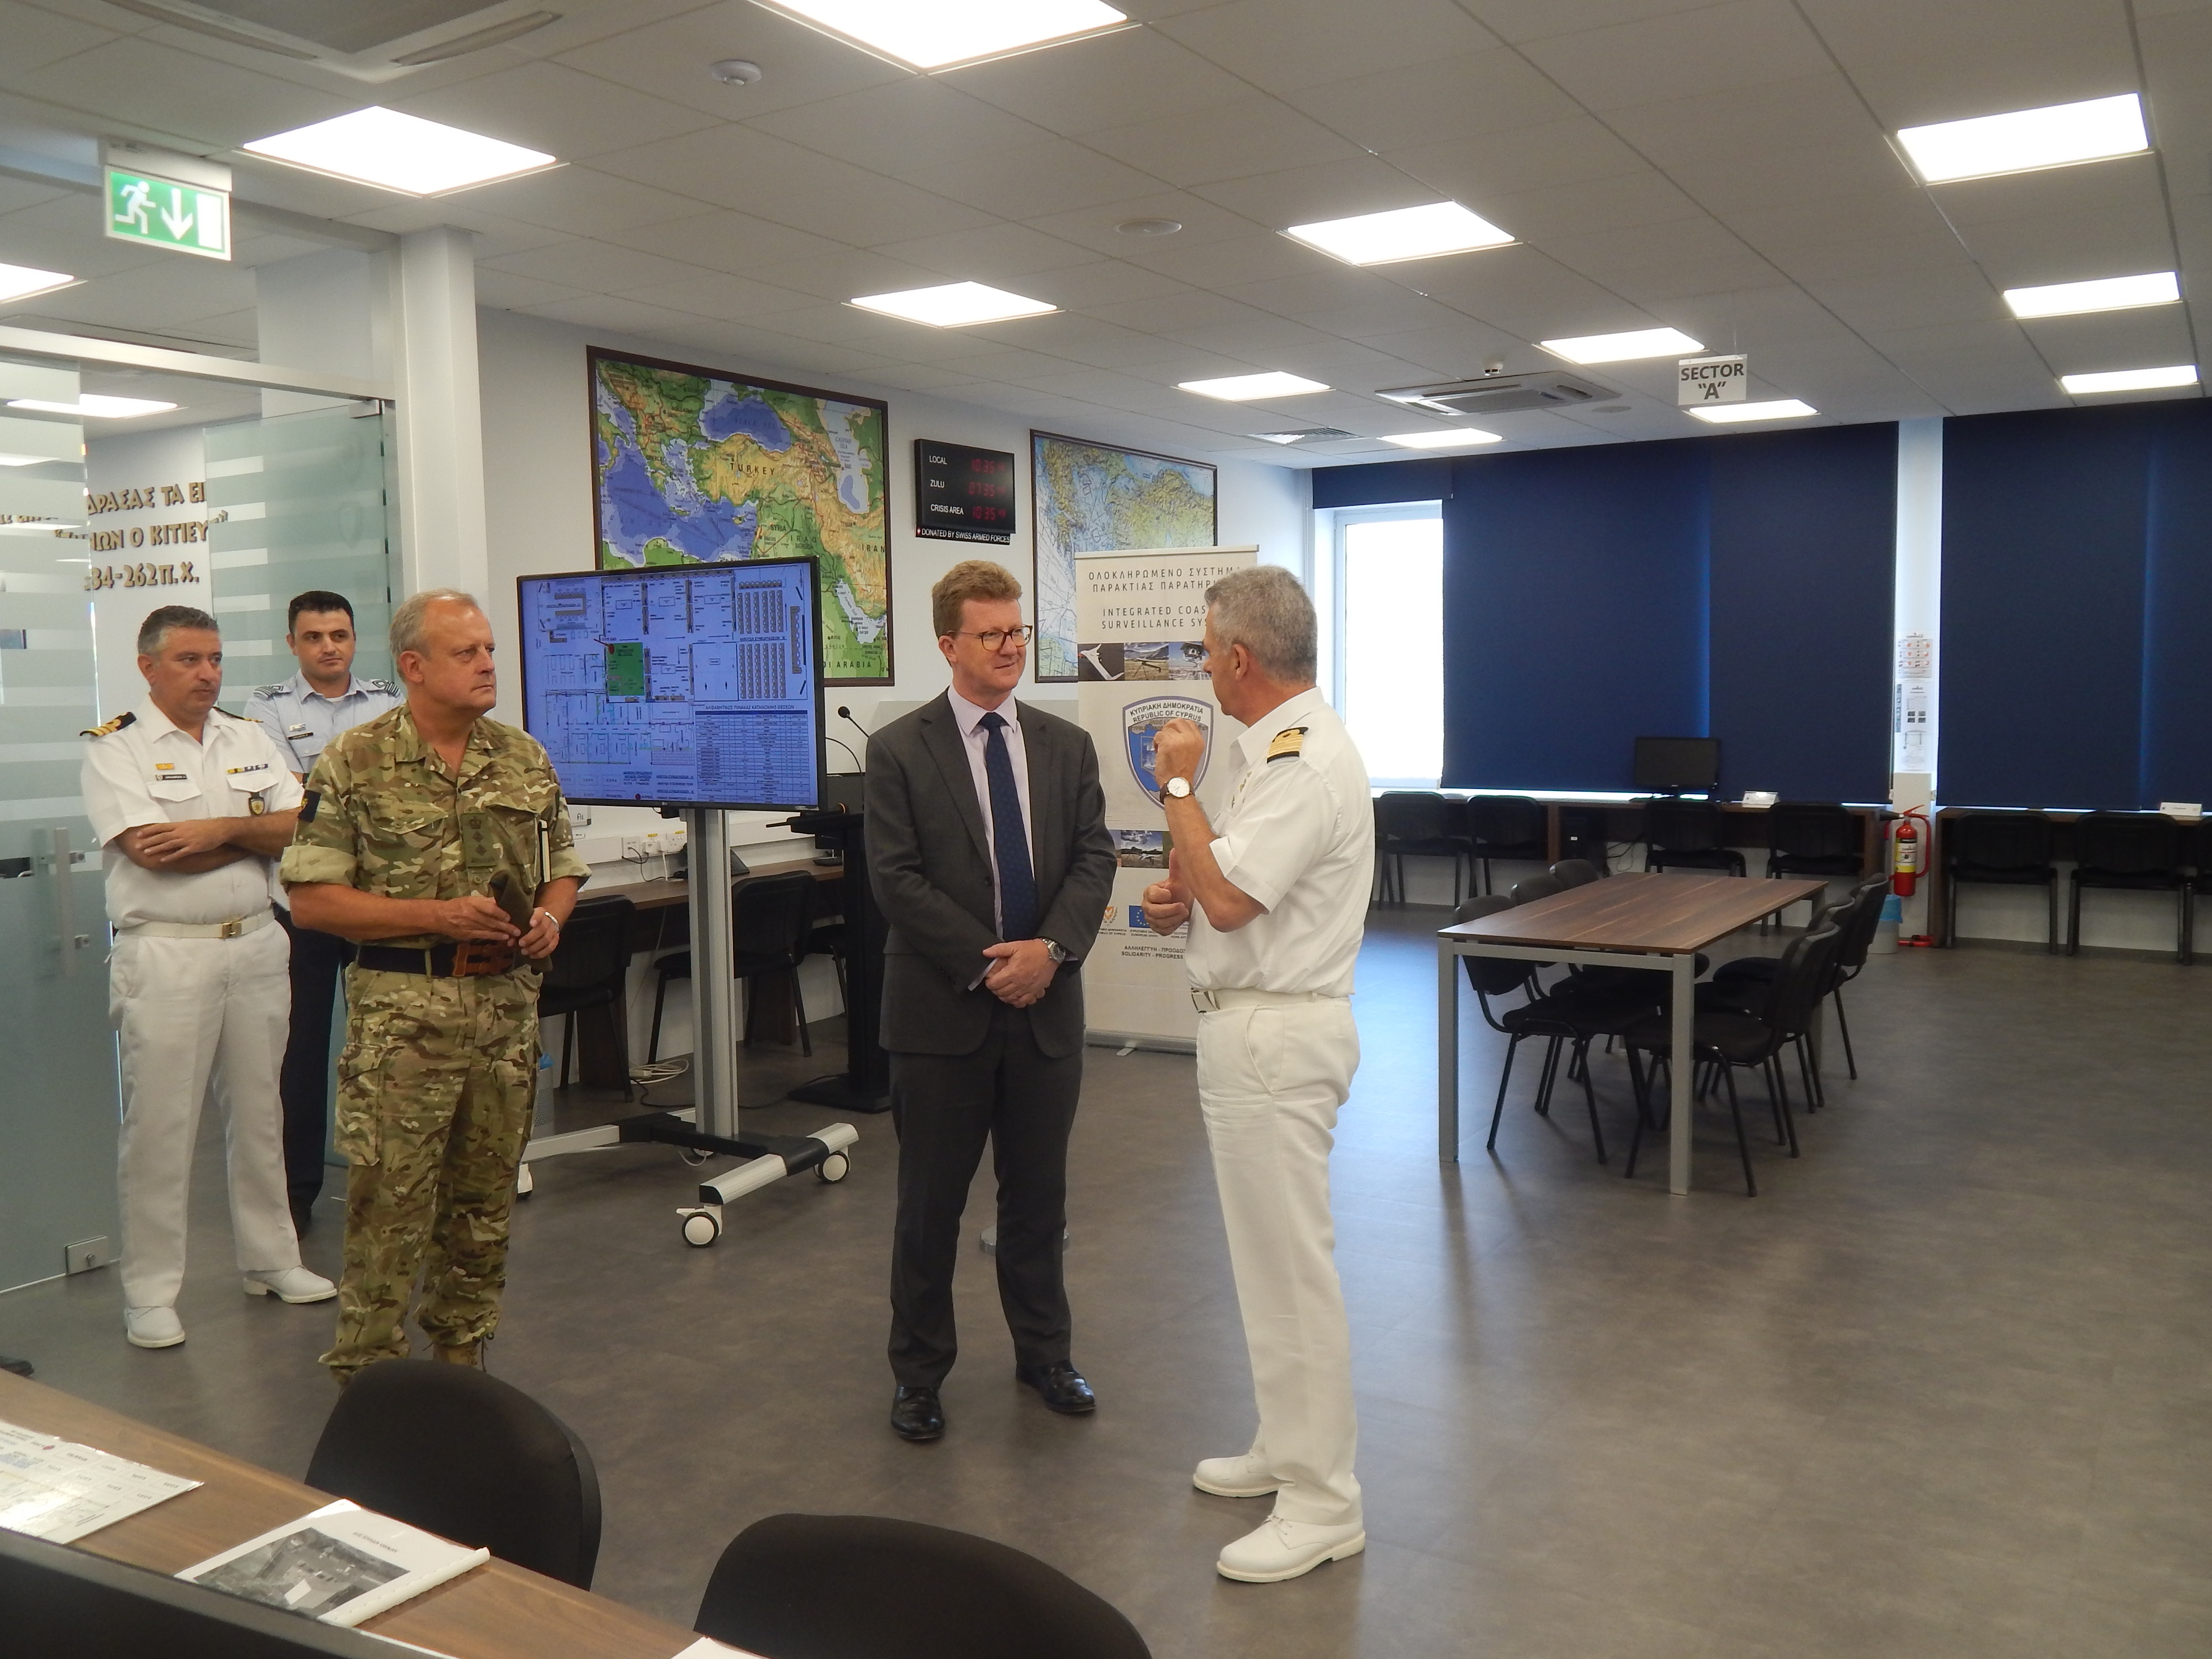 THE HIGH COMMISSIONER OF THE UNITED KINGDOM OF GREAT BRITAIN AND NORTHERN IRELAND TO CYPRUS, VISITED THE JRCC LARNACA